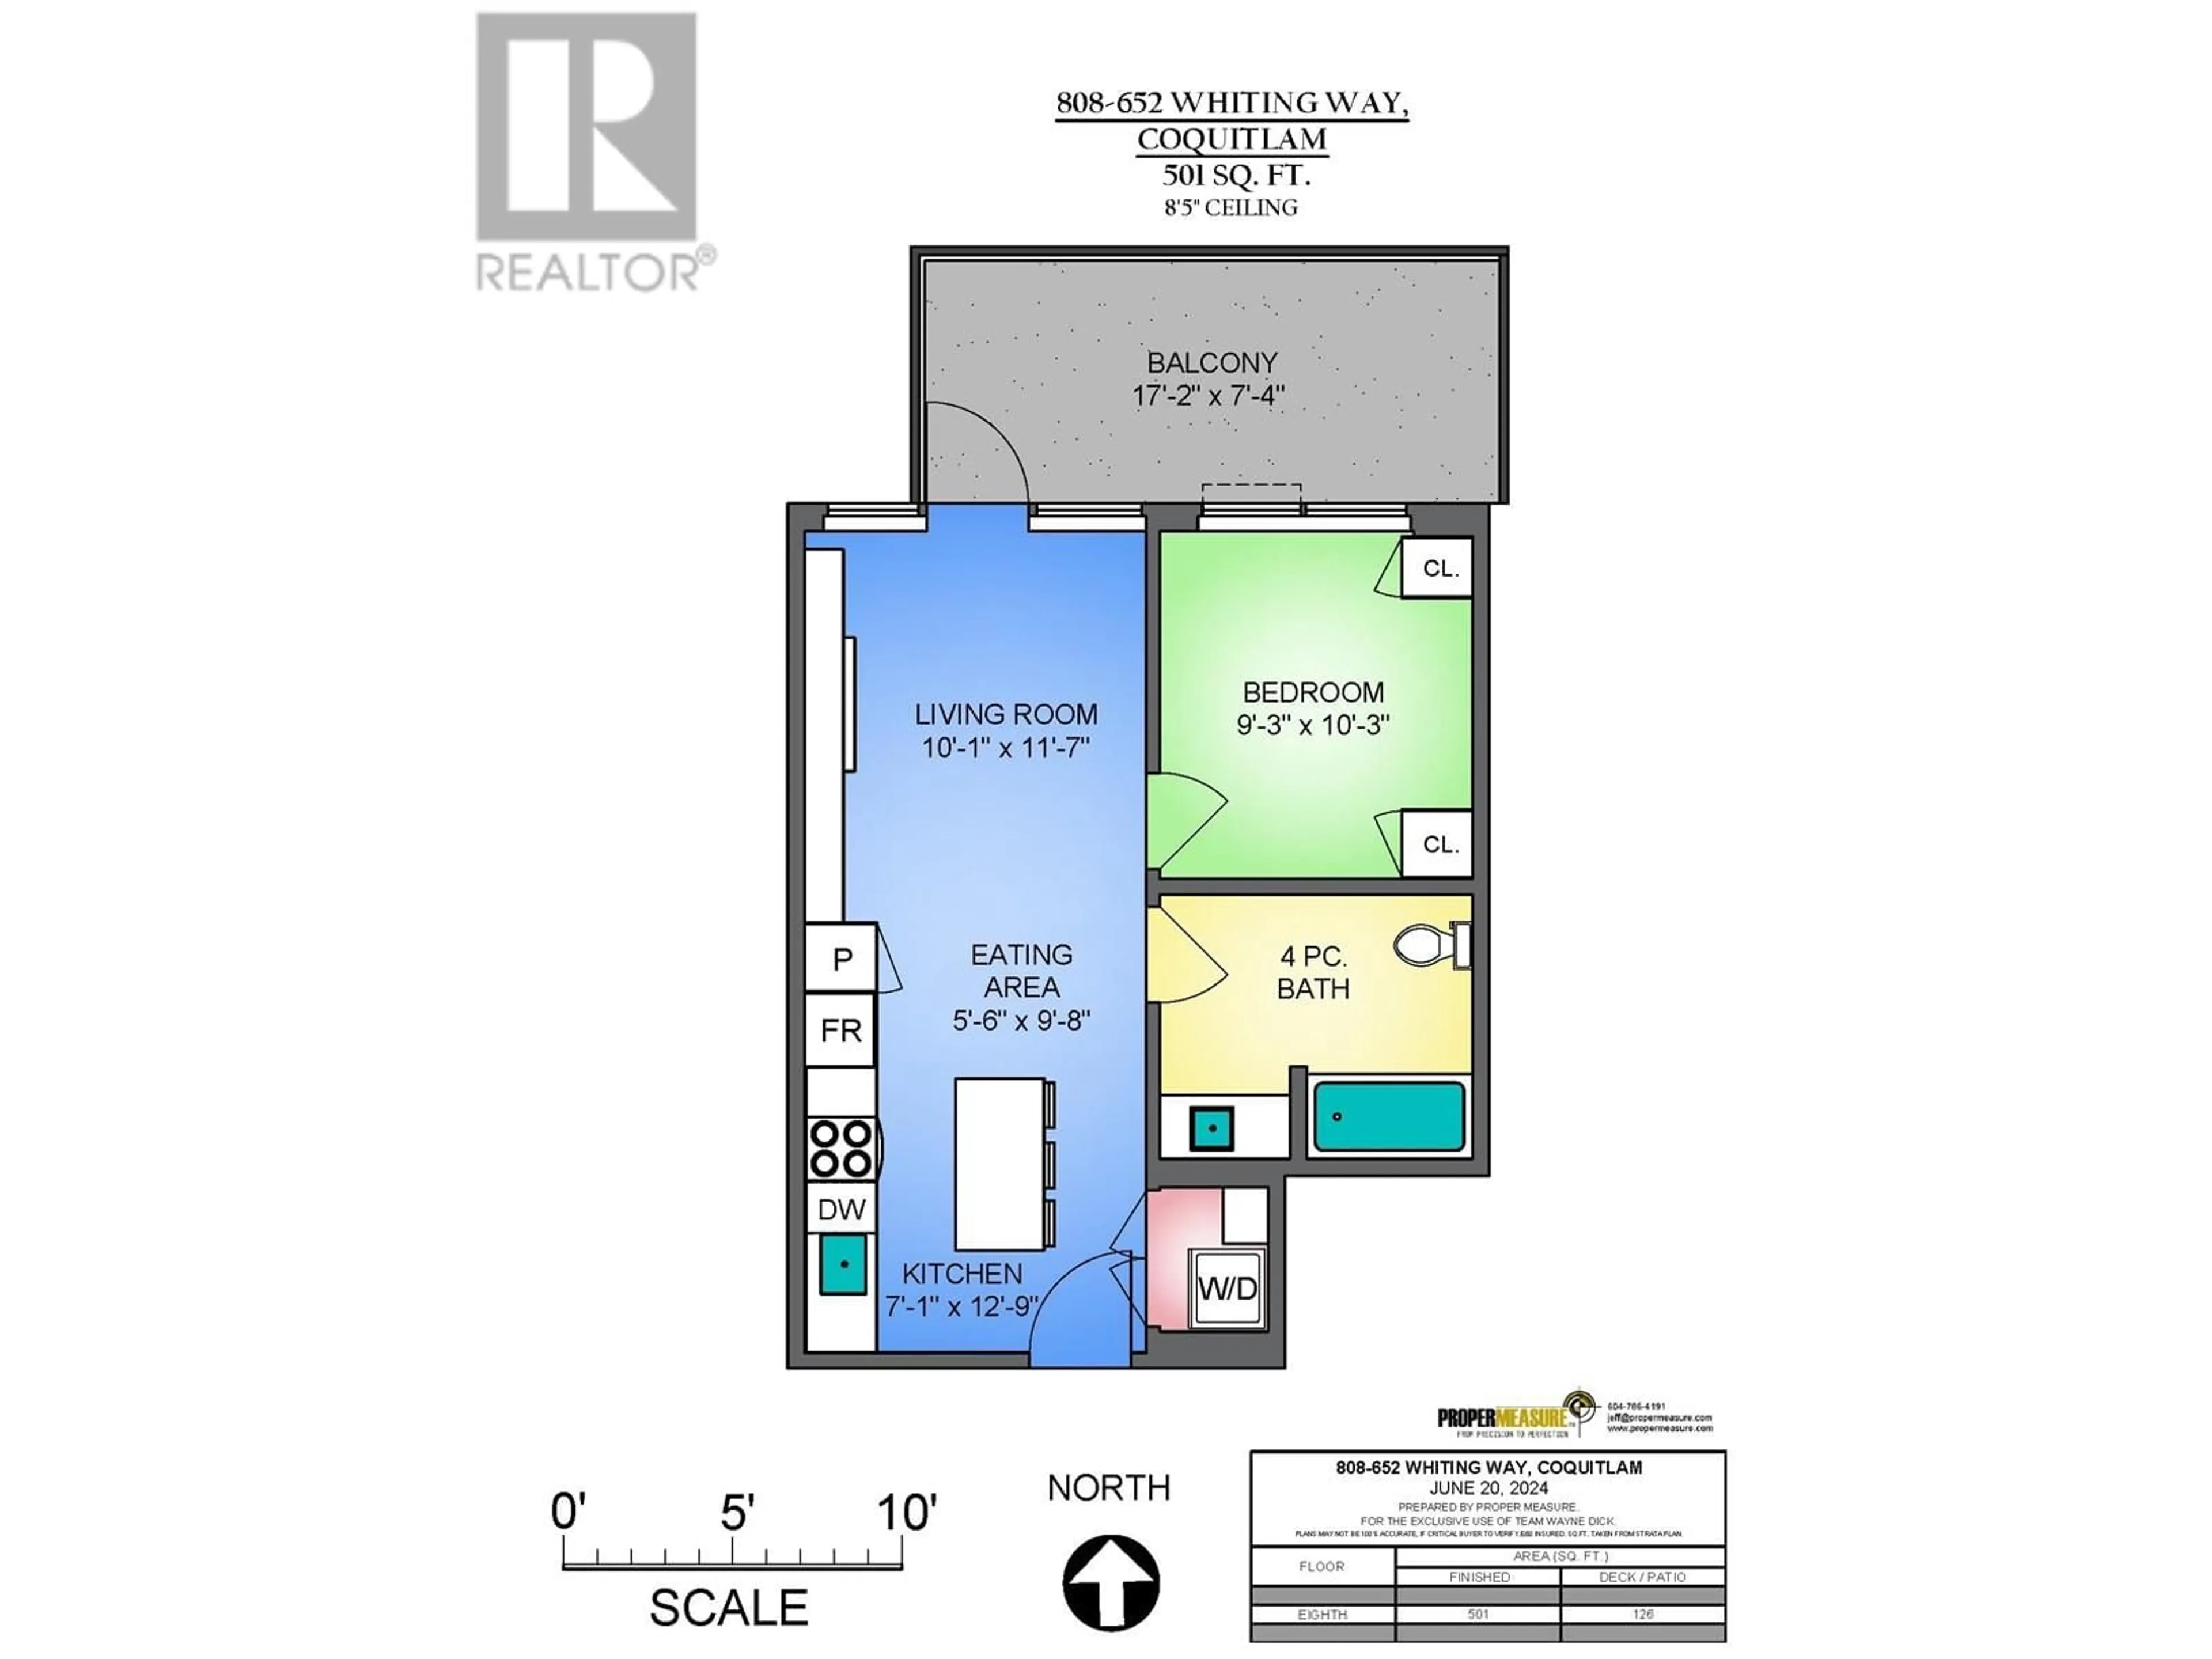 Floor plan for 808 652 WHITING WAY, Coquitlam British Columbia V3J0K3